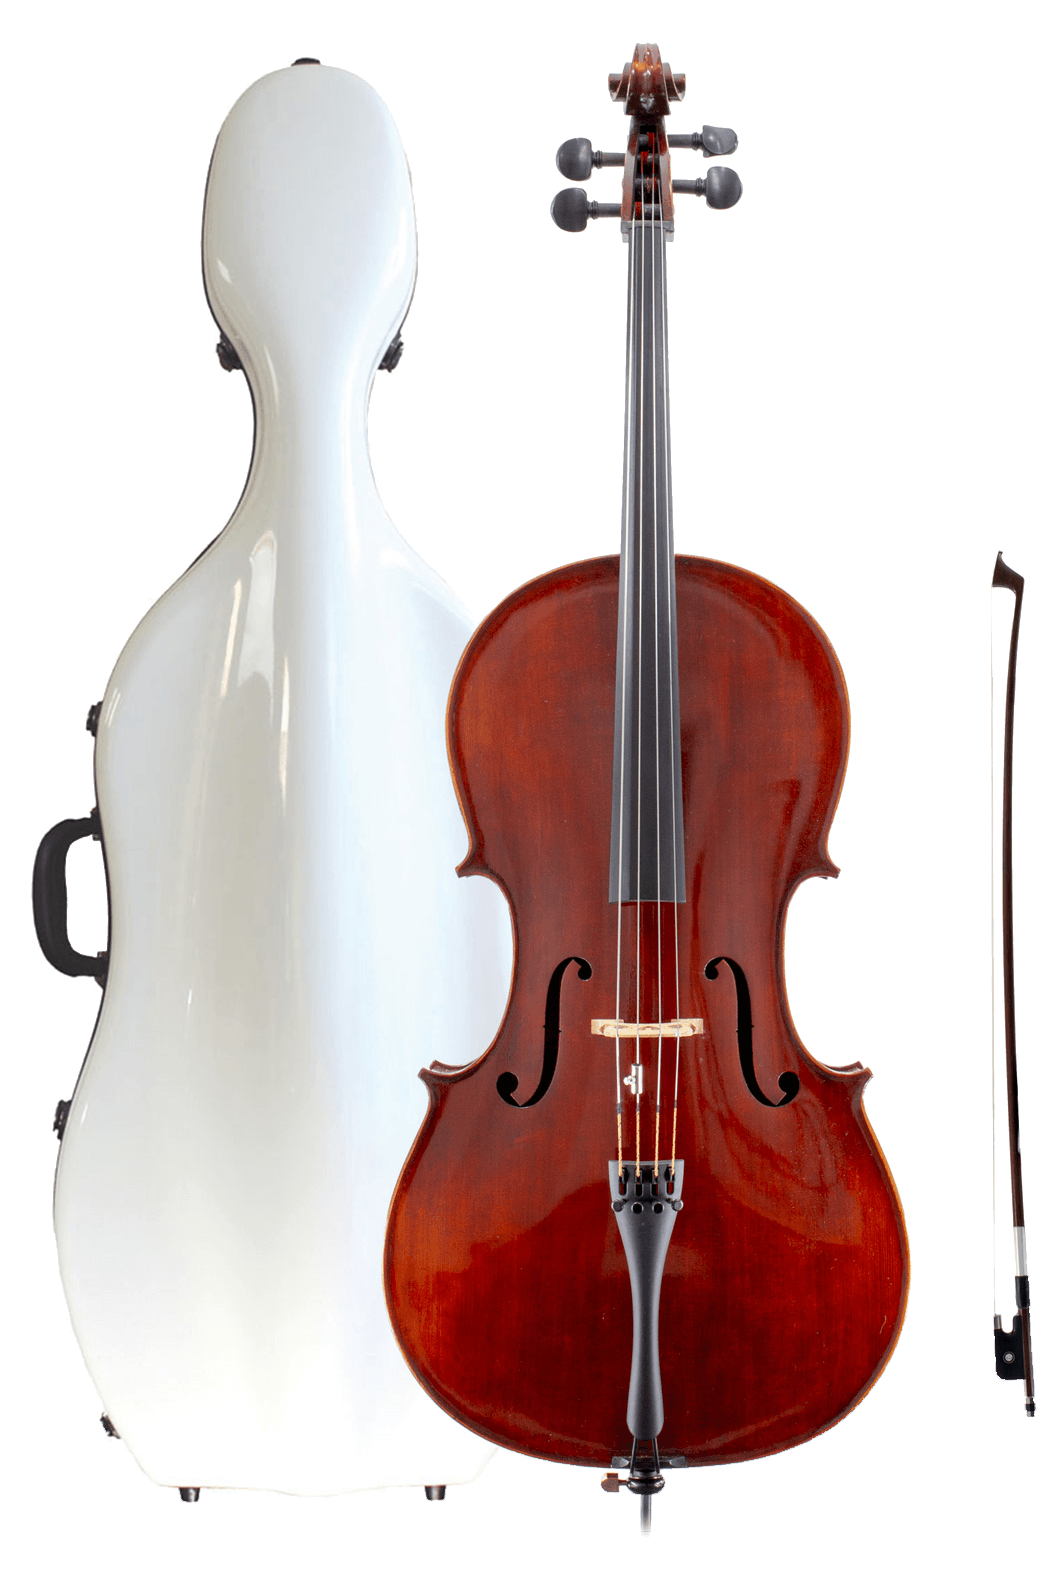 Stringers Symphony Cello Outfit - Stringers Music